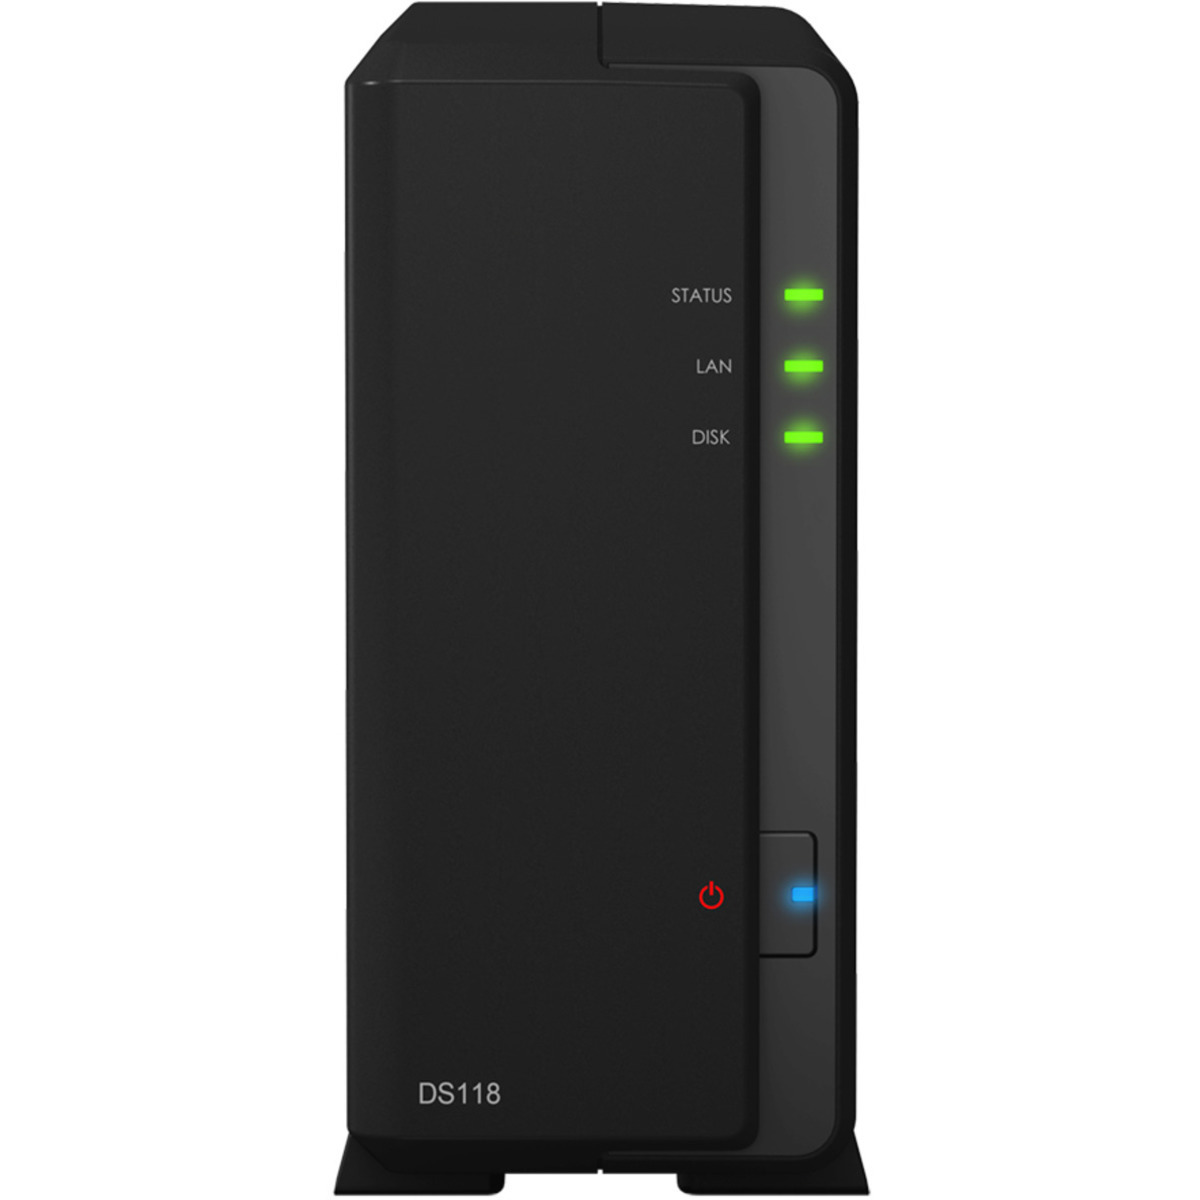 buy $715 Synology DiskStation DS118 20tb Desktop NAS - Network Attached Storage Device 1x20000gb Western Digital Ultrastar DC HC560 WUH722020ALE6L4 3.5 7200rpm SATA 6Gb/s HDD ENTERPRISE Class Drives Installed - Burn-In Tested - nas headquarters buy network attached storage server device das new raid-5 free shipping simply usa DiskStation DS118